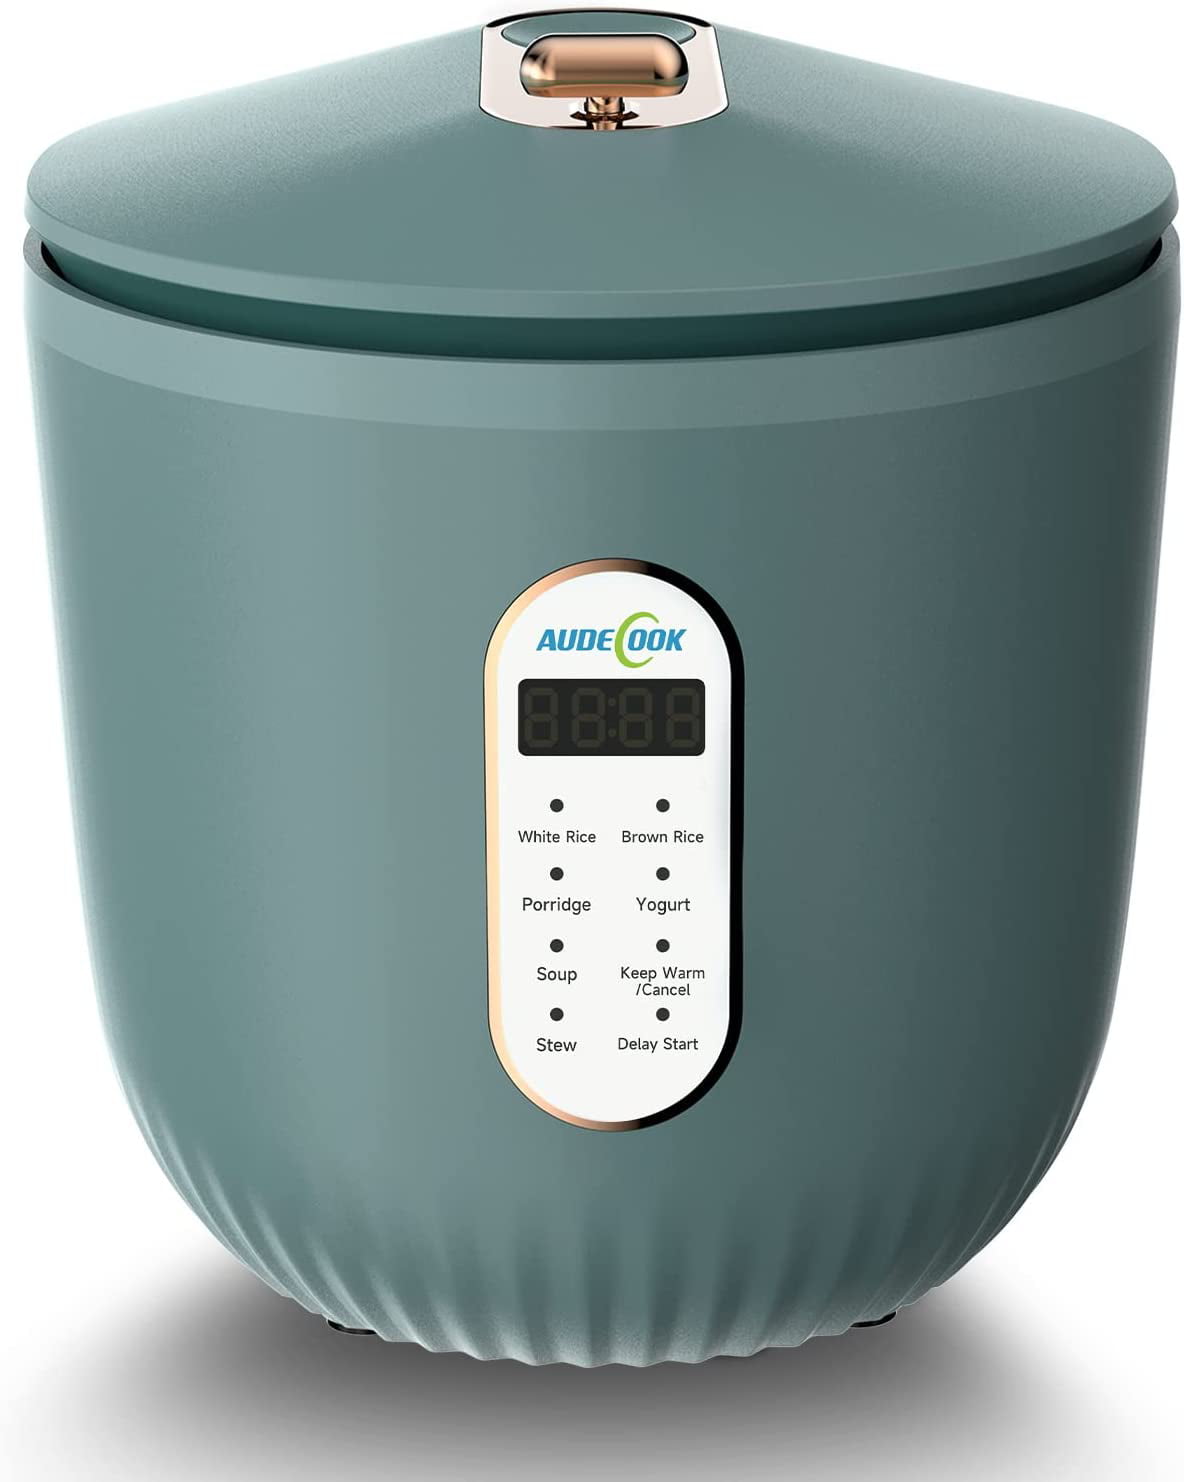 Digital Mini Rice Cooker, 4 Cups Uncooked (2L/1.8QT) Small Rice Cooker with  12H Delay Timer & Keep Warm Function, Electric Rice Cooker for Apartment/ Small Kitchen/College Dorm/RV Travel, Green 